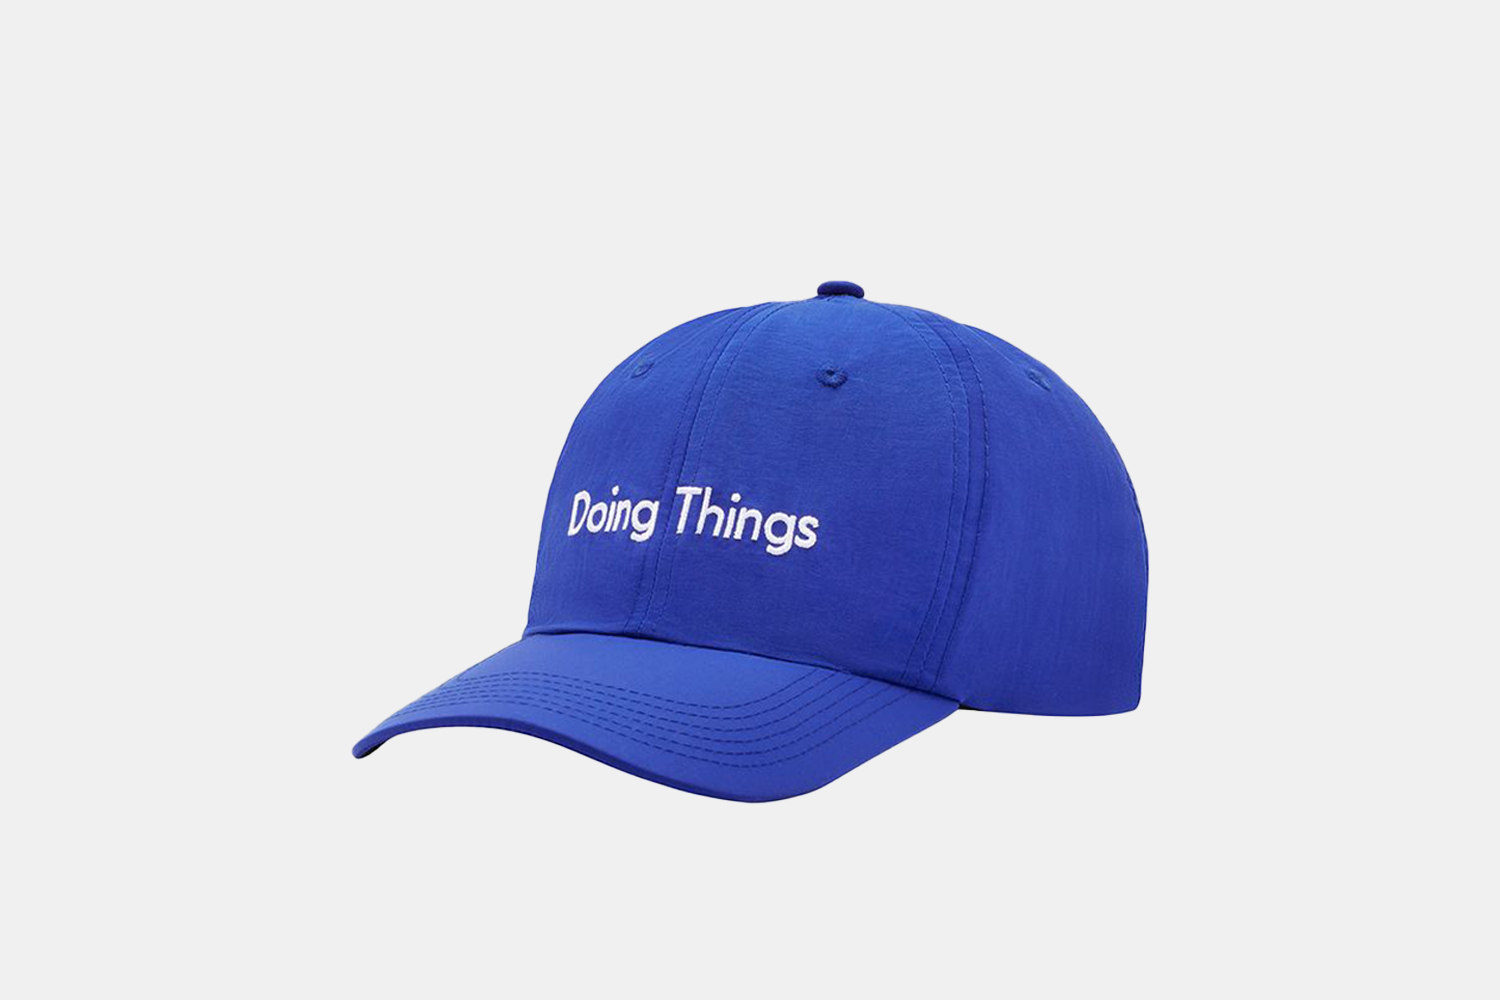 a light blue hat with the phrase "doing things" scrolled across the top.